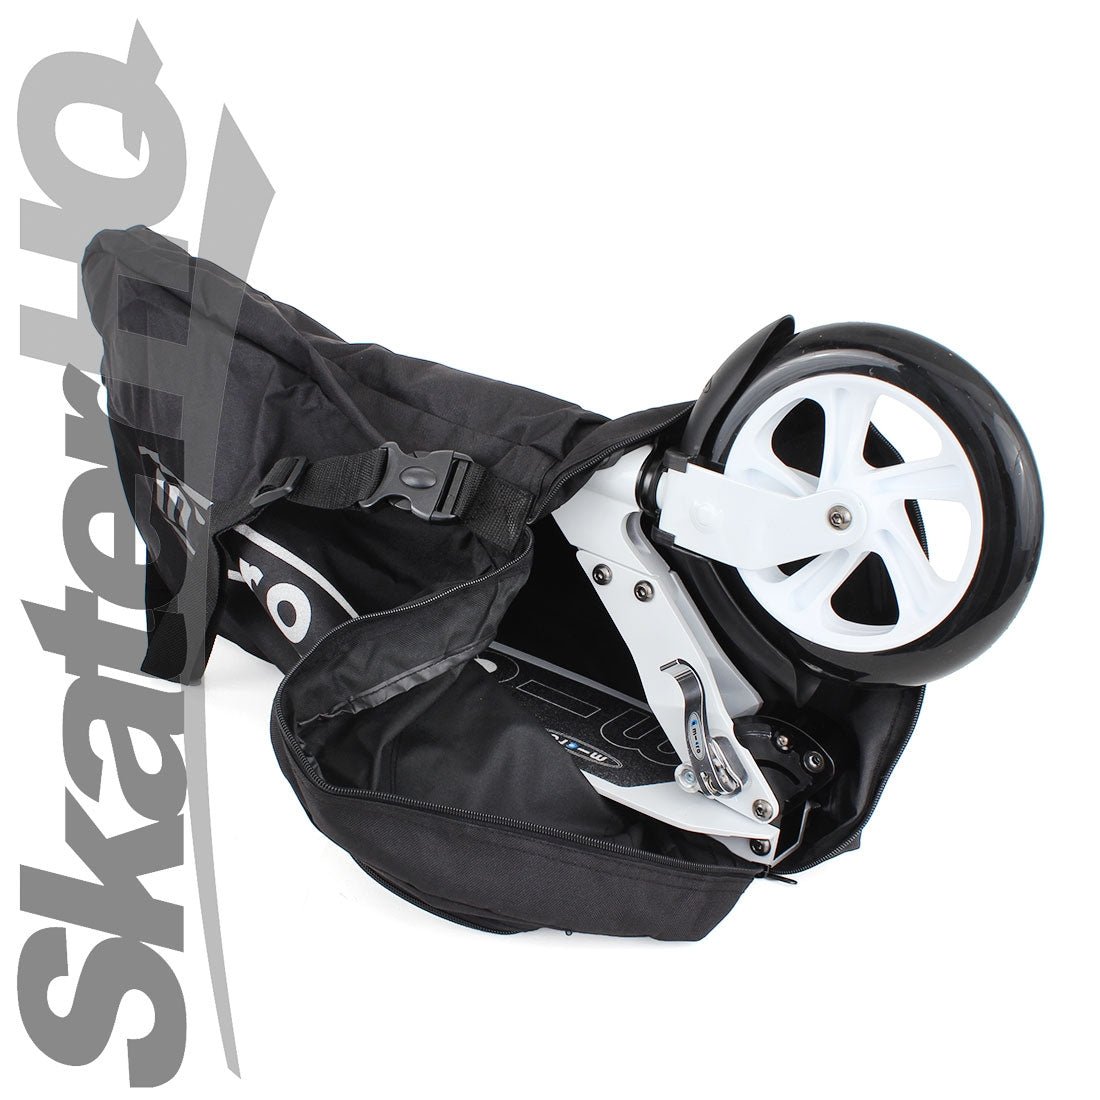 Micro Scooter Carry Bag in Bag - Black Scooter Accessories